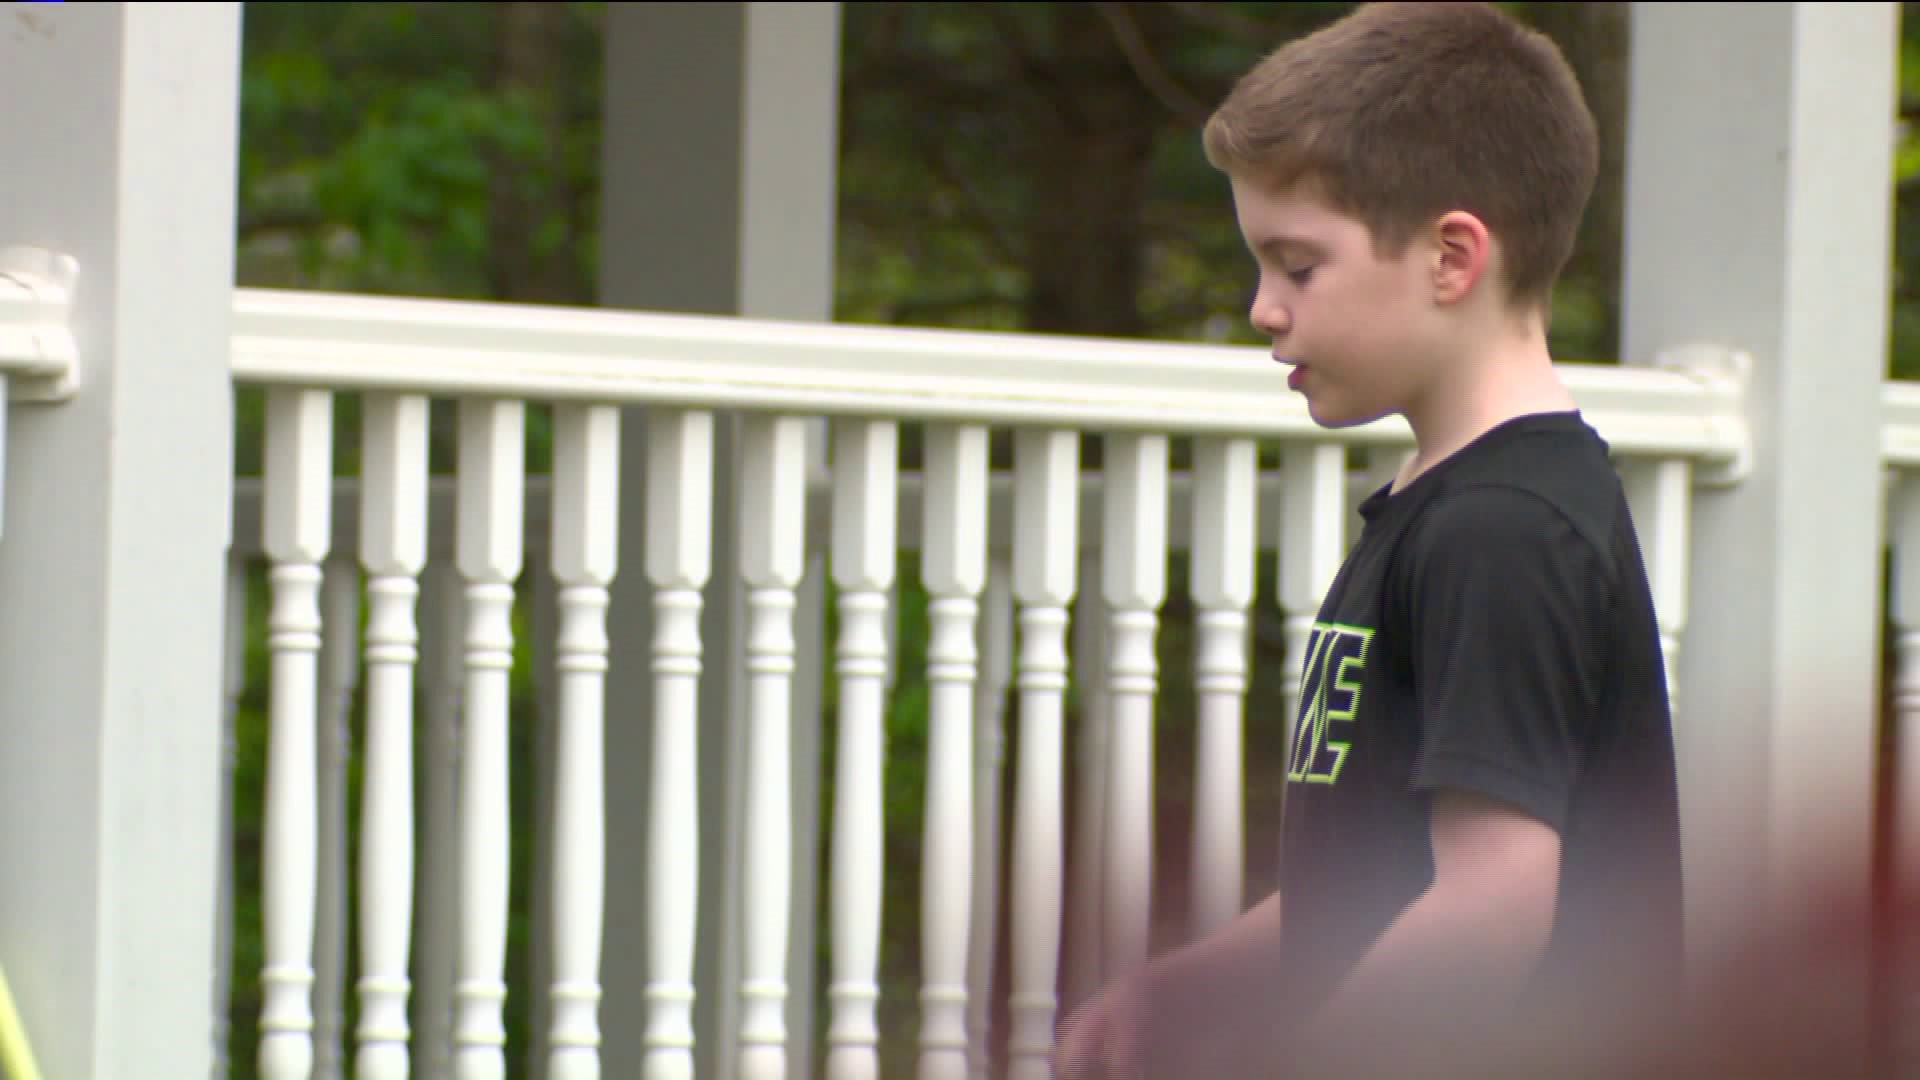 Bullied at first, Branford boy now finds support